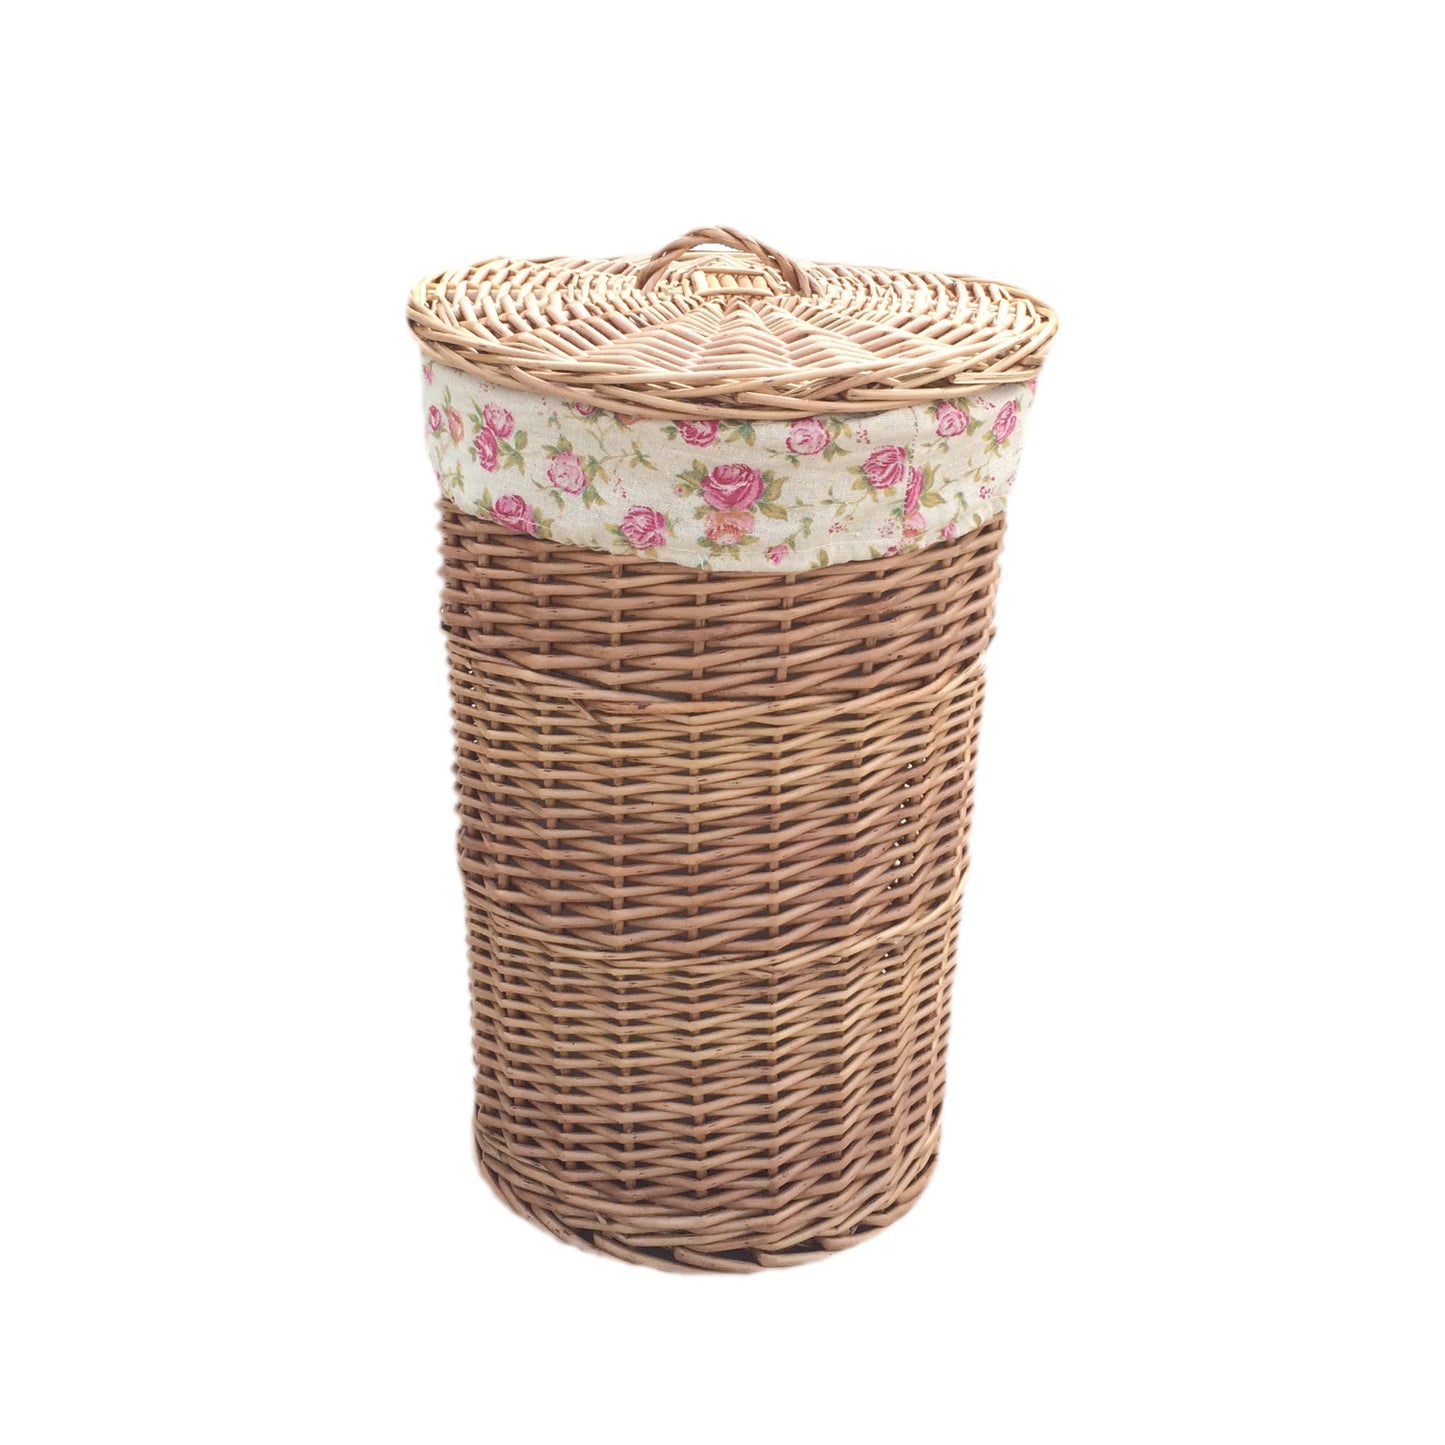 Small Light Steamed Round Linen Basket With Garden Rose Lining